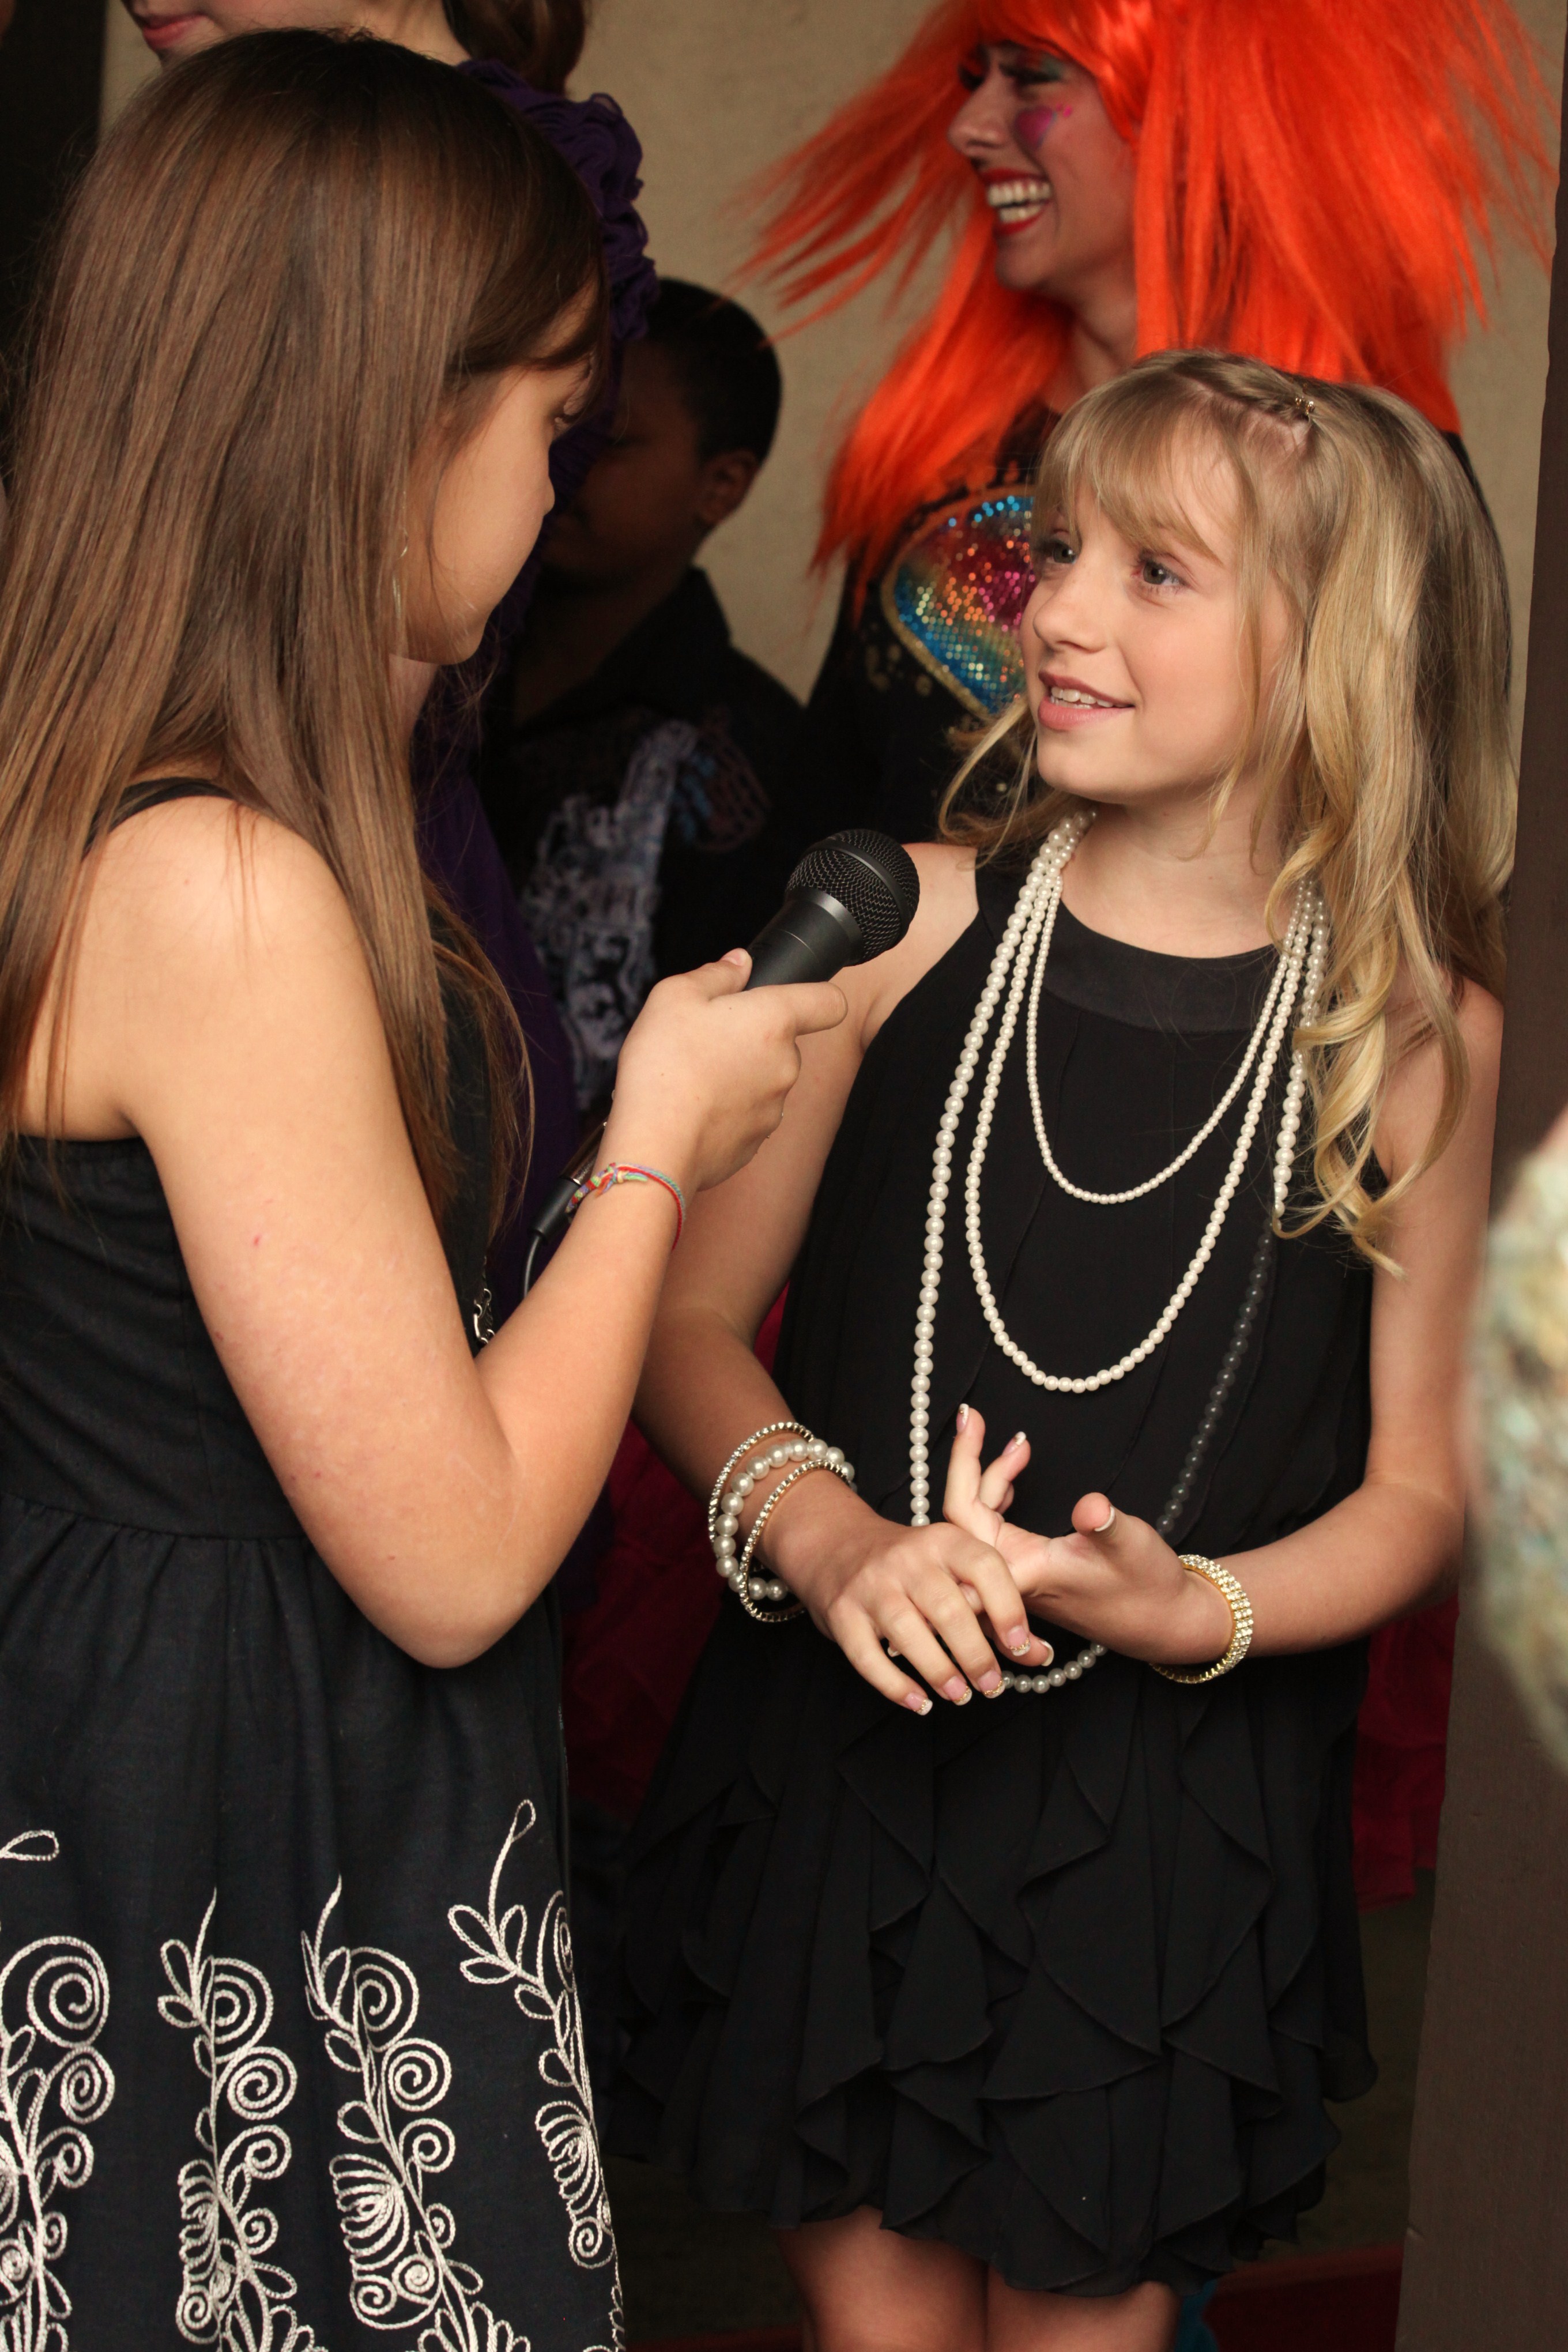 Being interviewed on Red Carpet for YAA 2010.